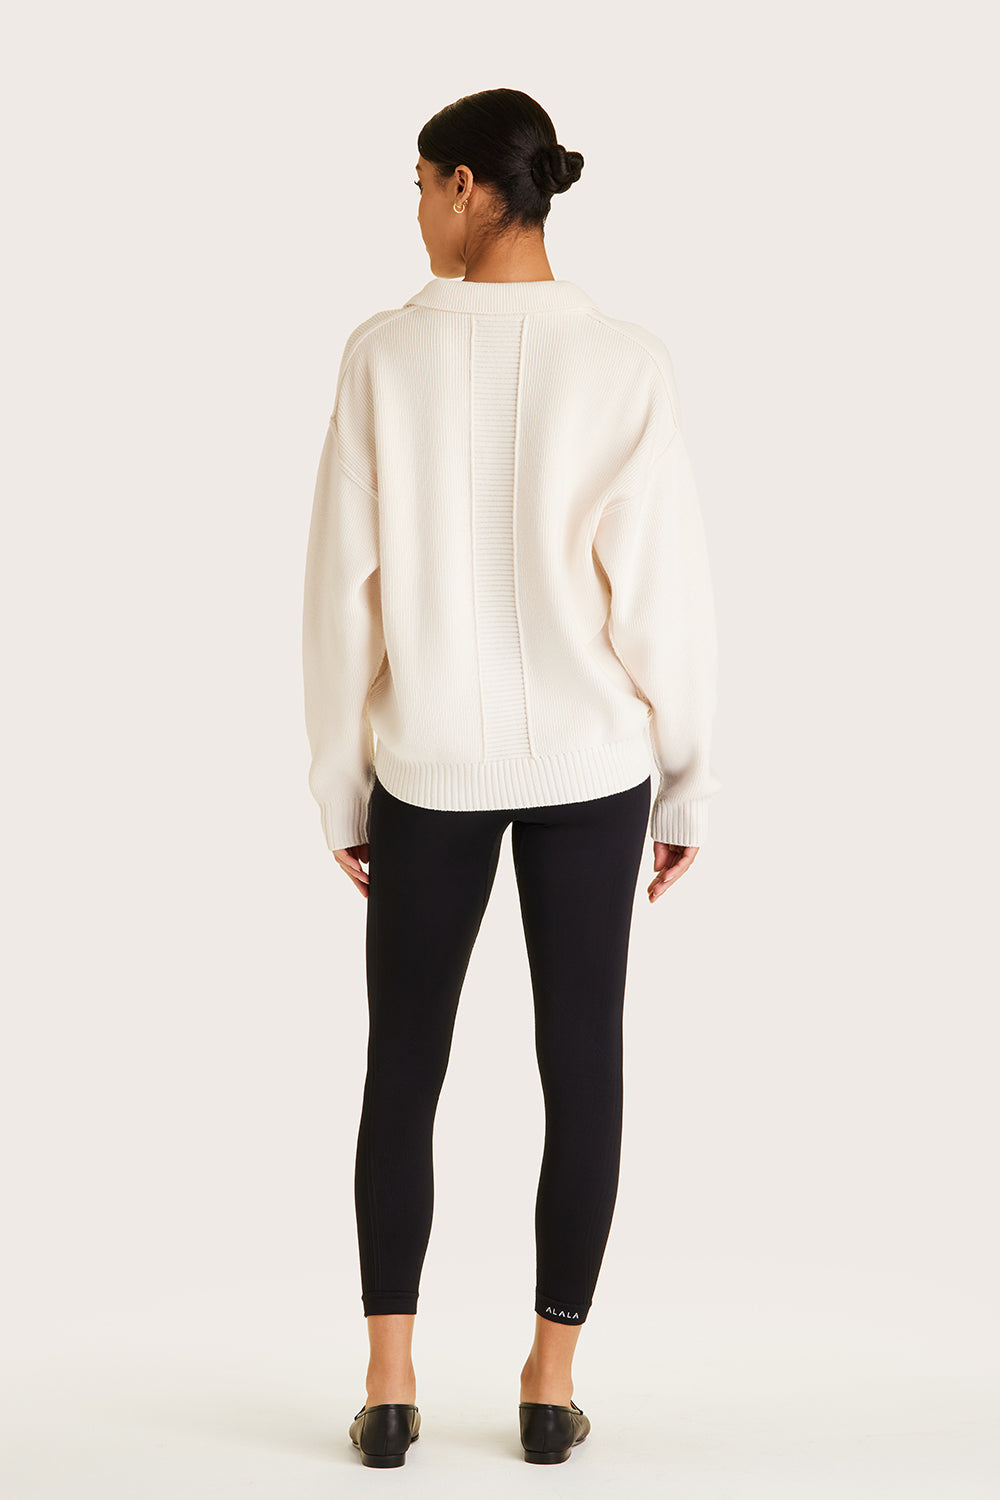 Alala women's collared knit sweater in white